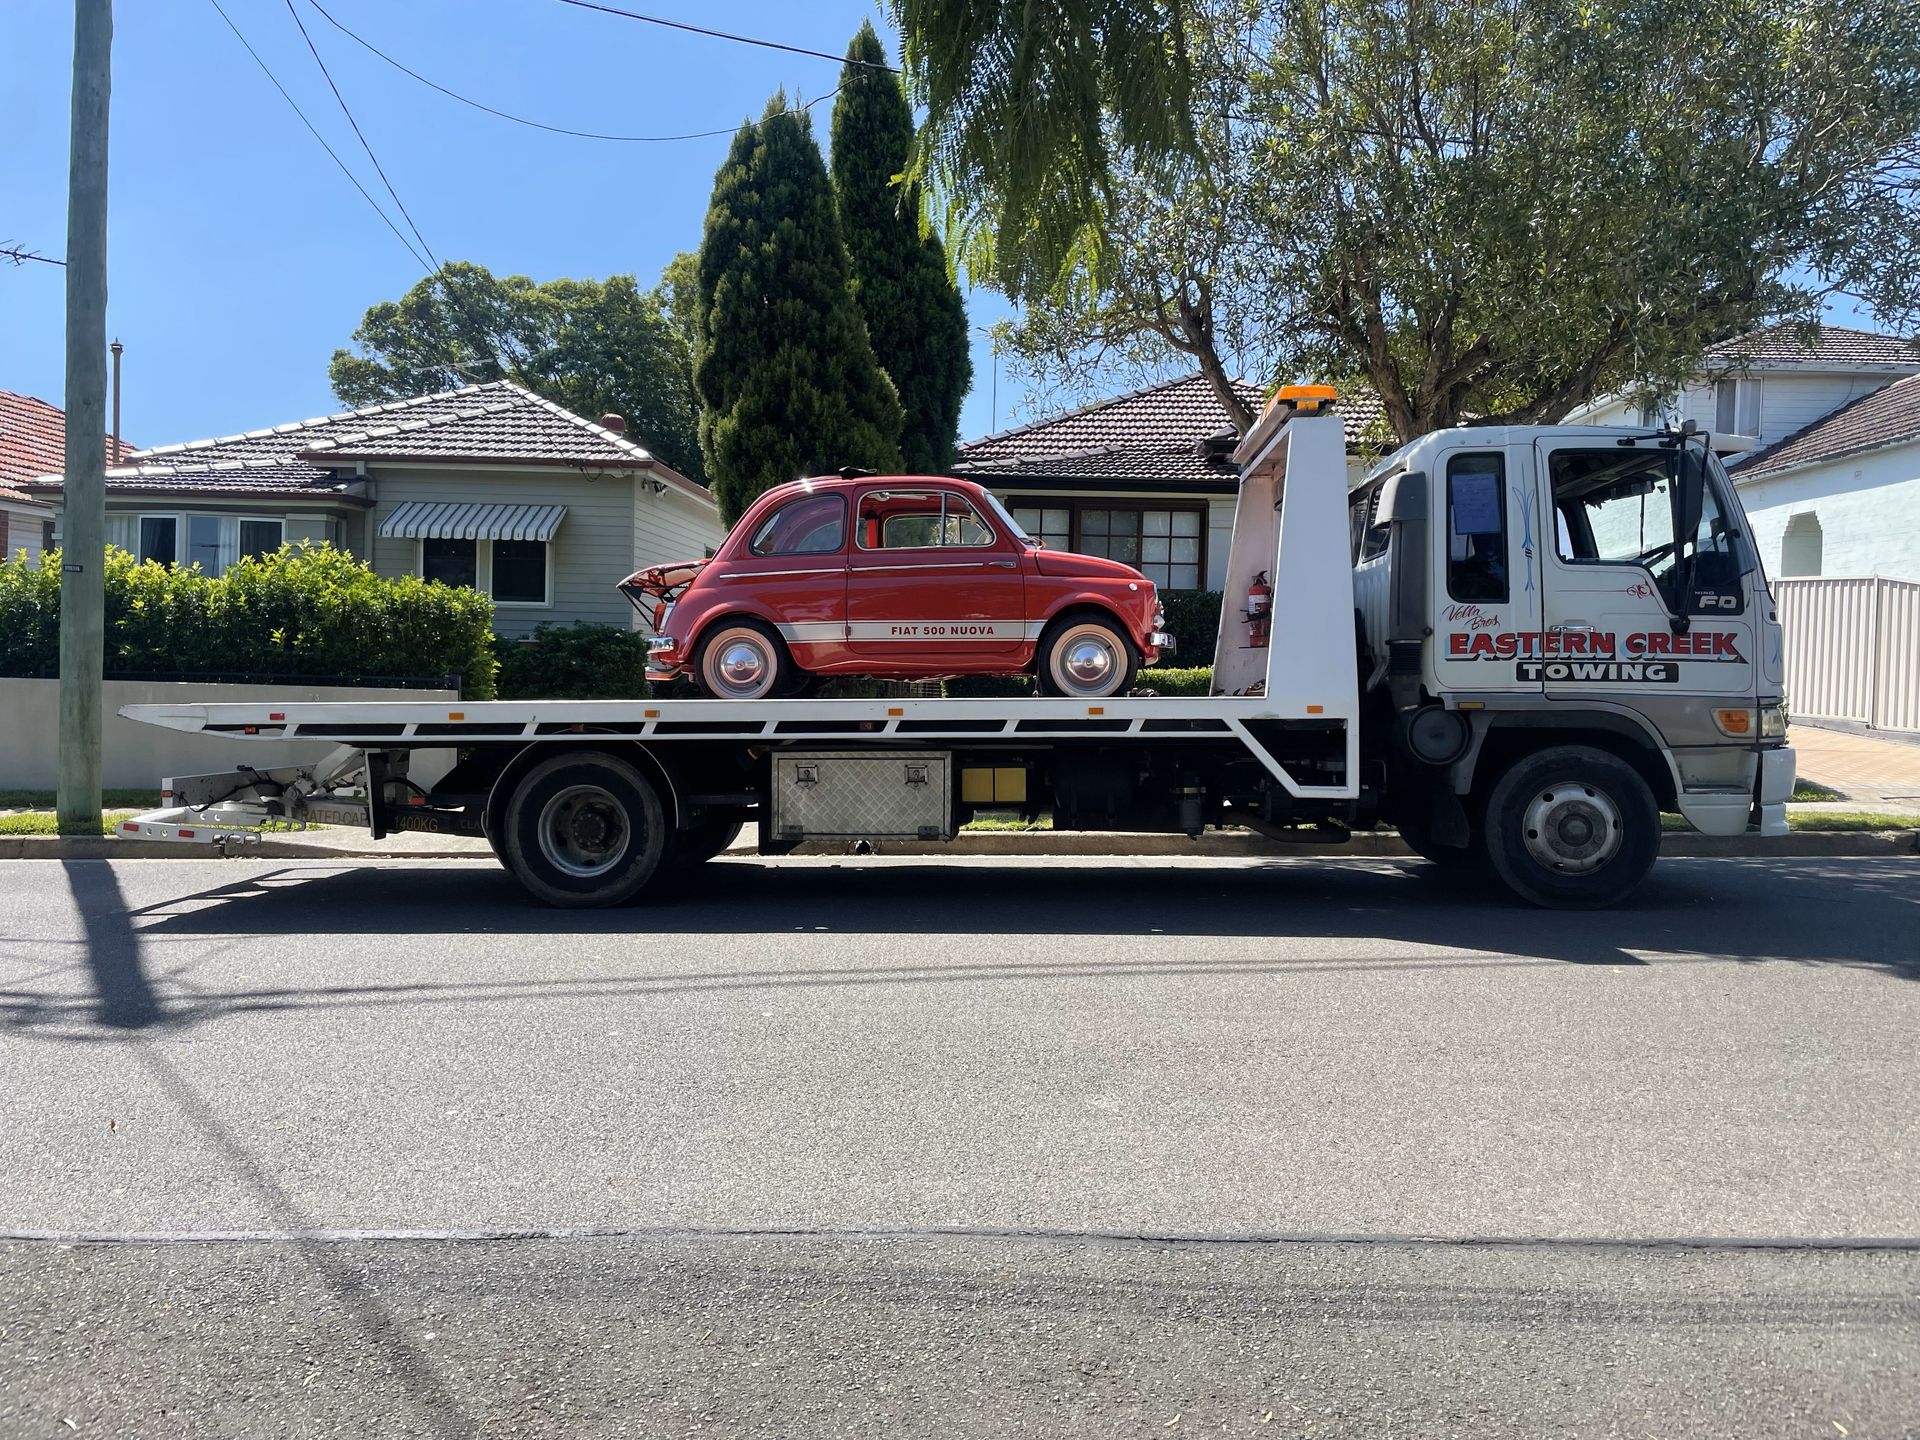 Tow truck operator towing a car | Blacktown, NSW | Eastern Creek Towing